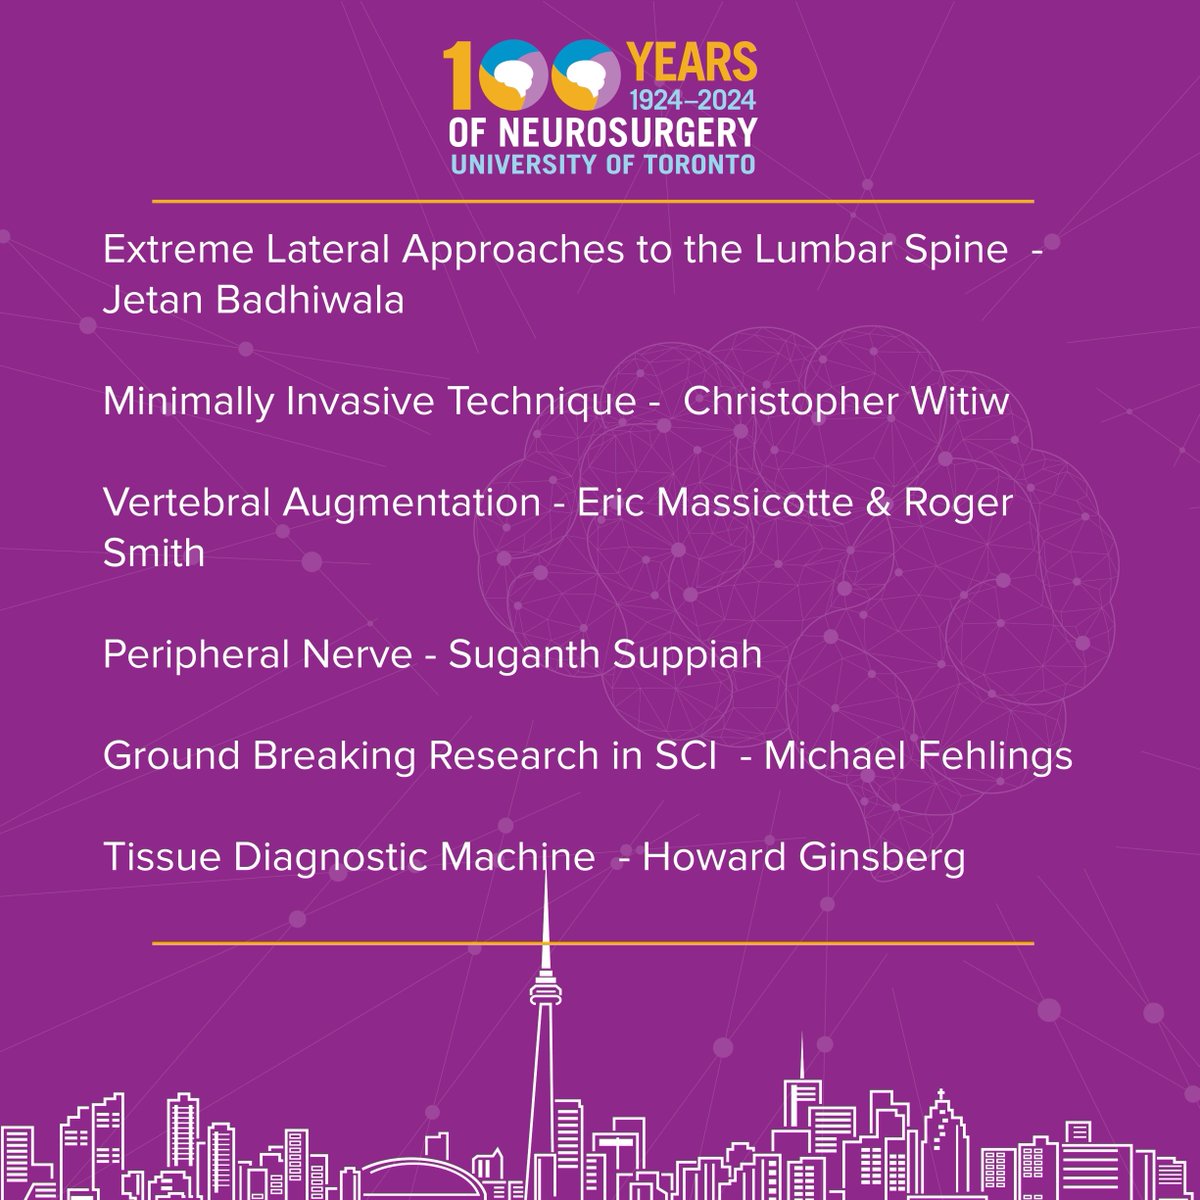 Next Wednesday we will be hosting the #Spine and #PeripheralNerve Special Topics Course, featuring @jetanbadhiwala, @cwitiw, @DrMassicotte, Roger Smith, @SuganthSuppiah, @DrFehlings, and Howard Ginsberg! There’s still time to register: bit.ly/3UDAJwR